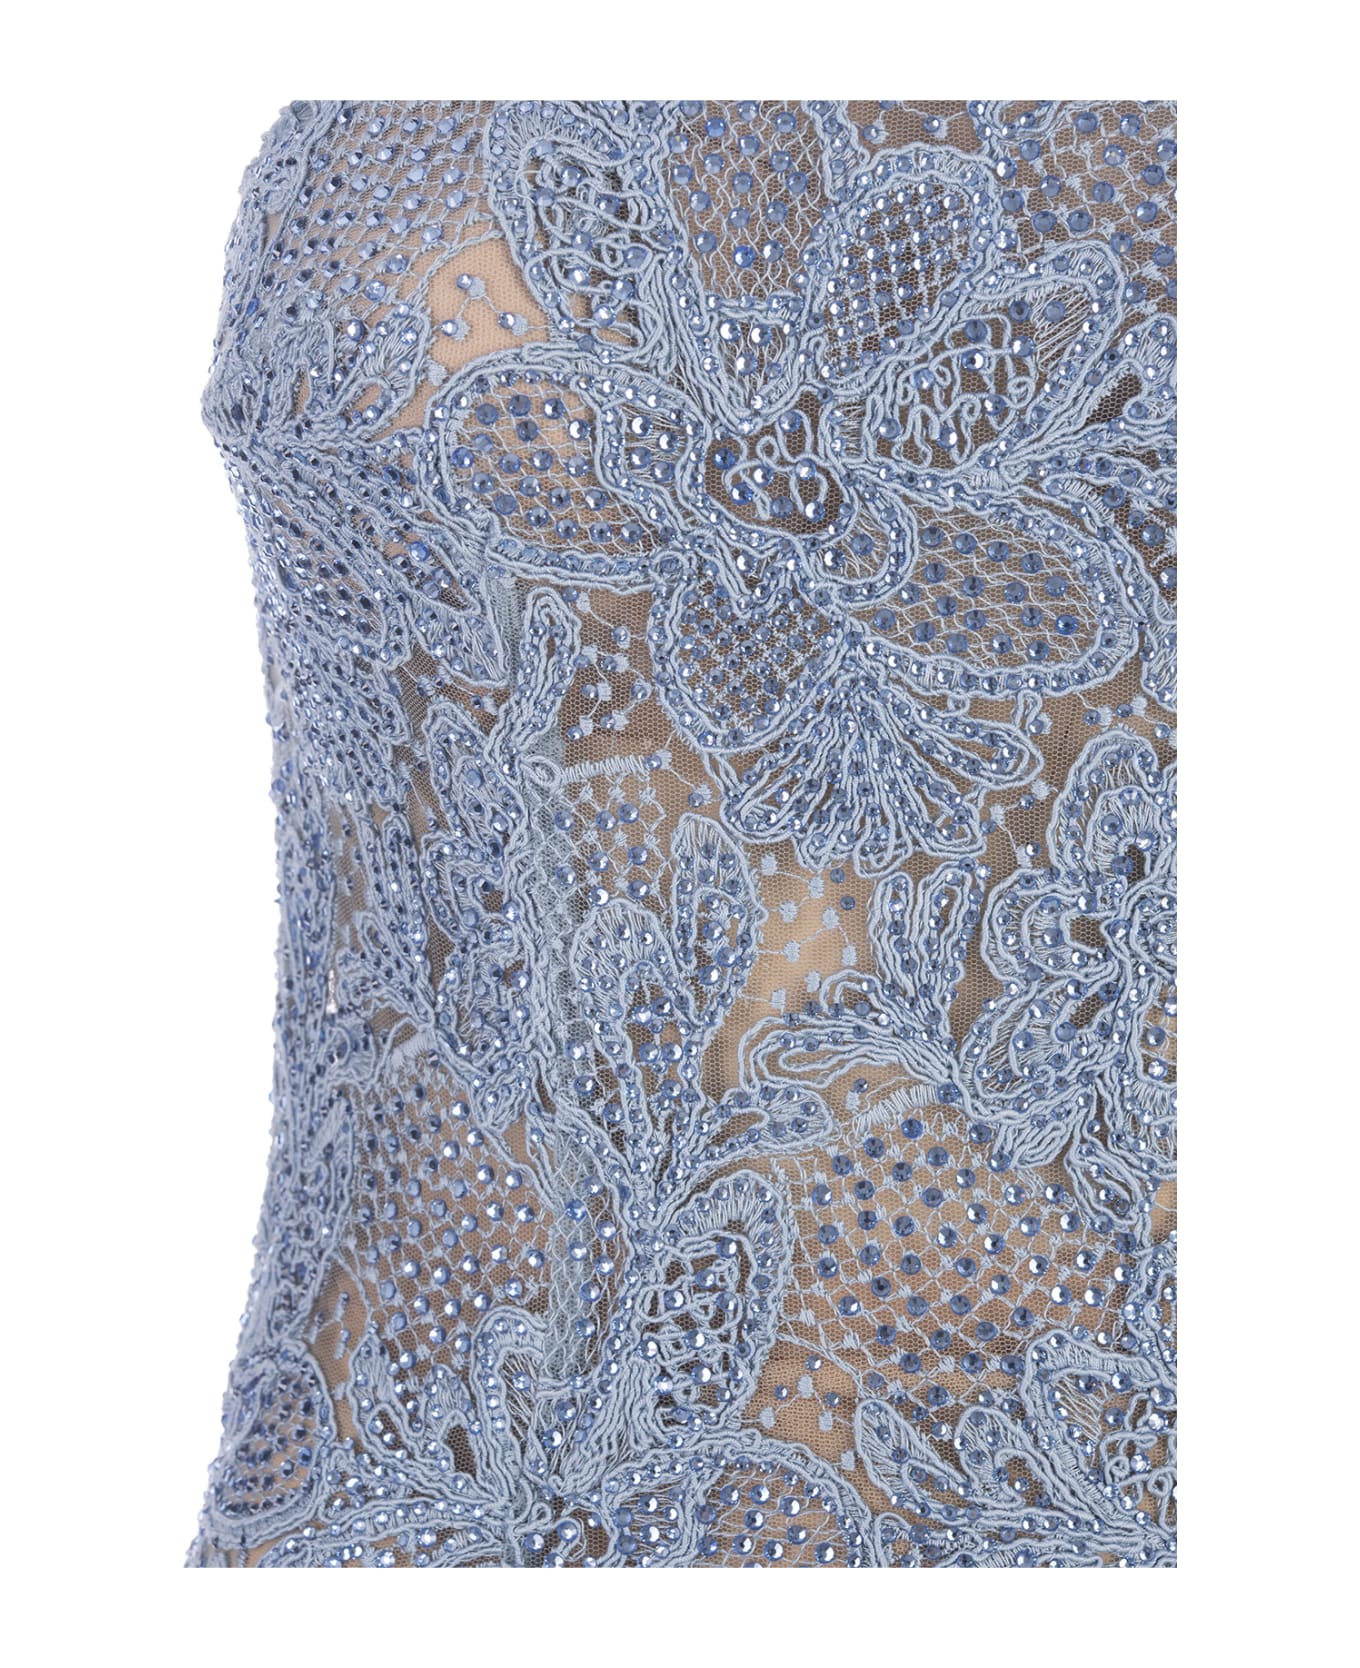 Ermanno Scervino Midi Dress In Light Blue Lace With Crystals - Blue ワンピース＆ドレス